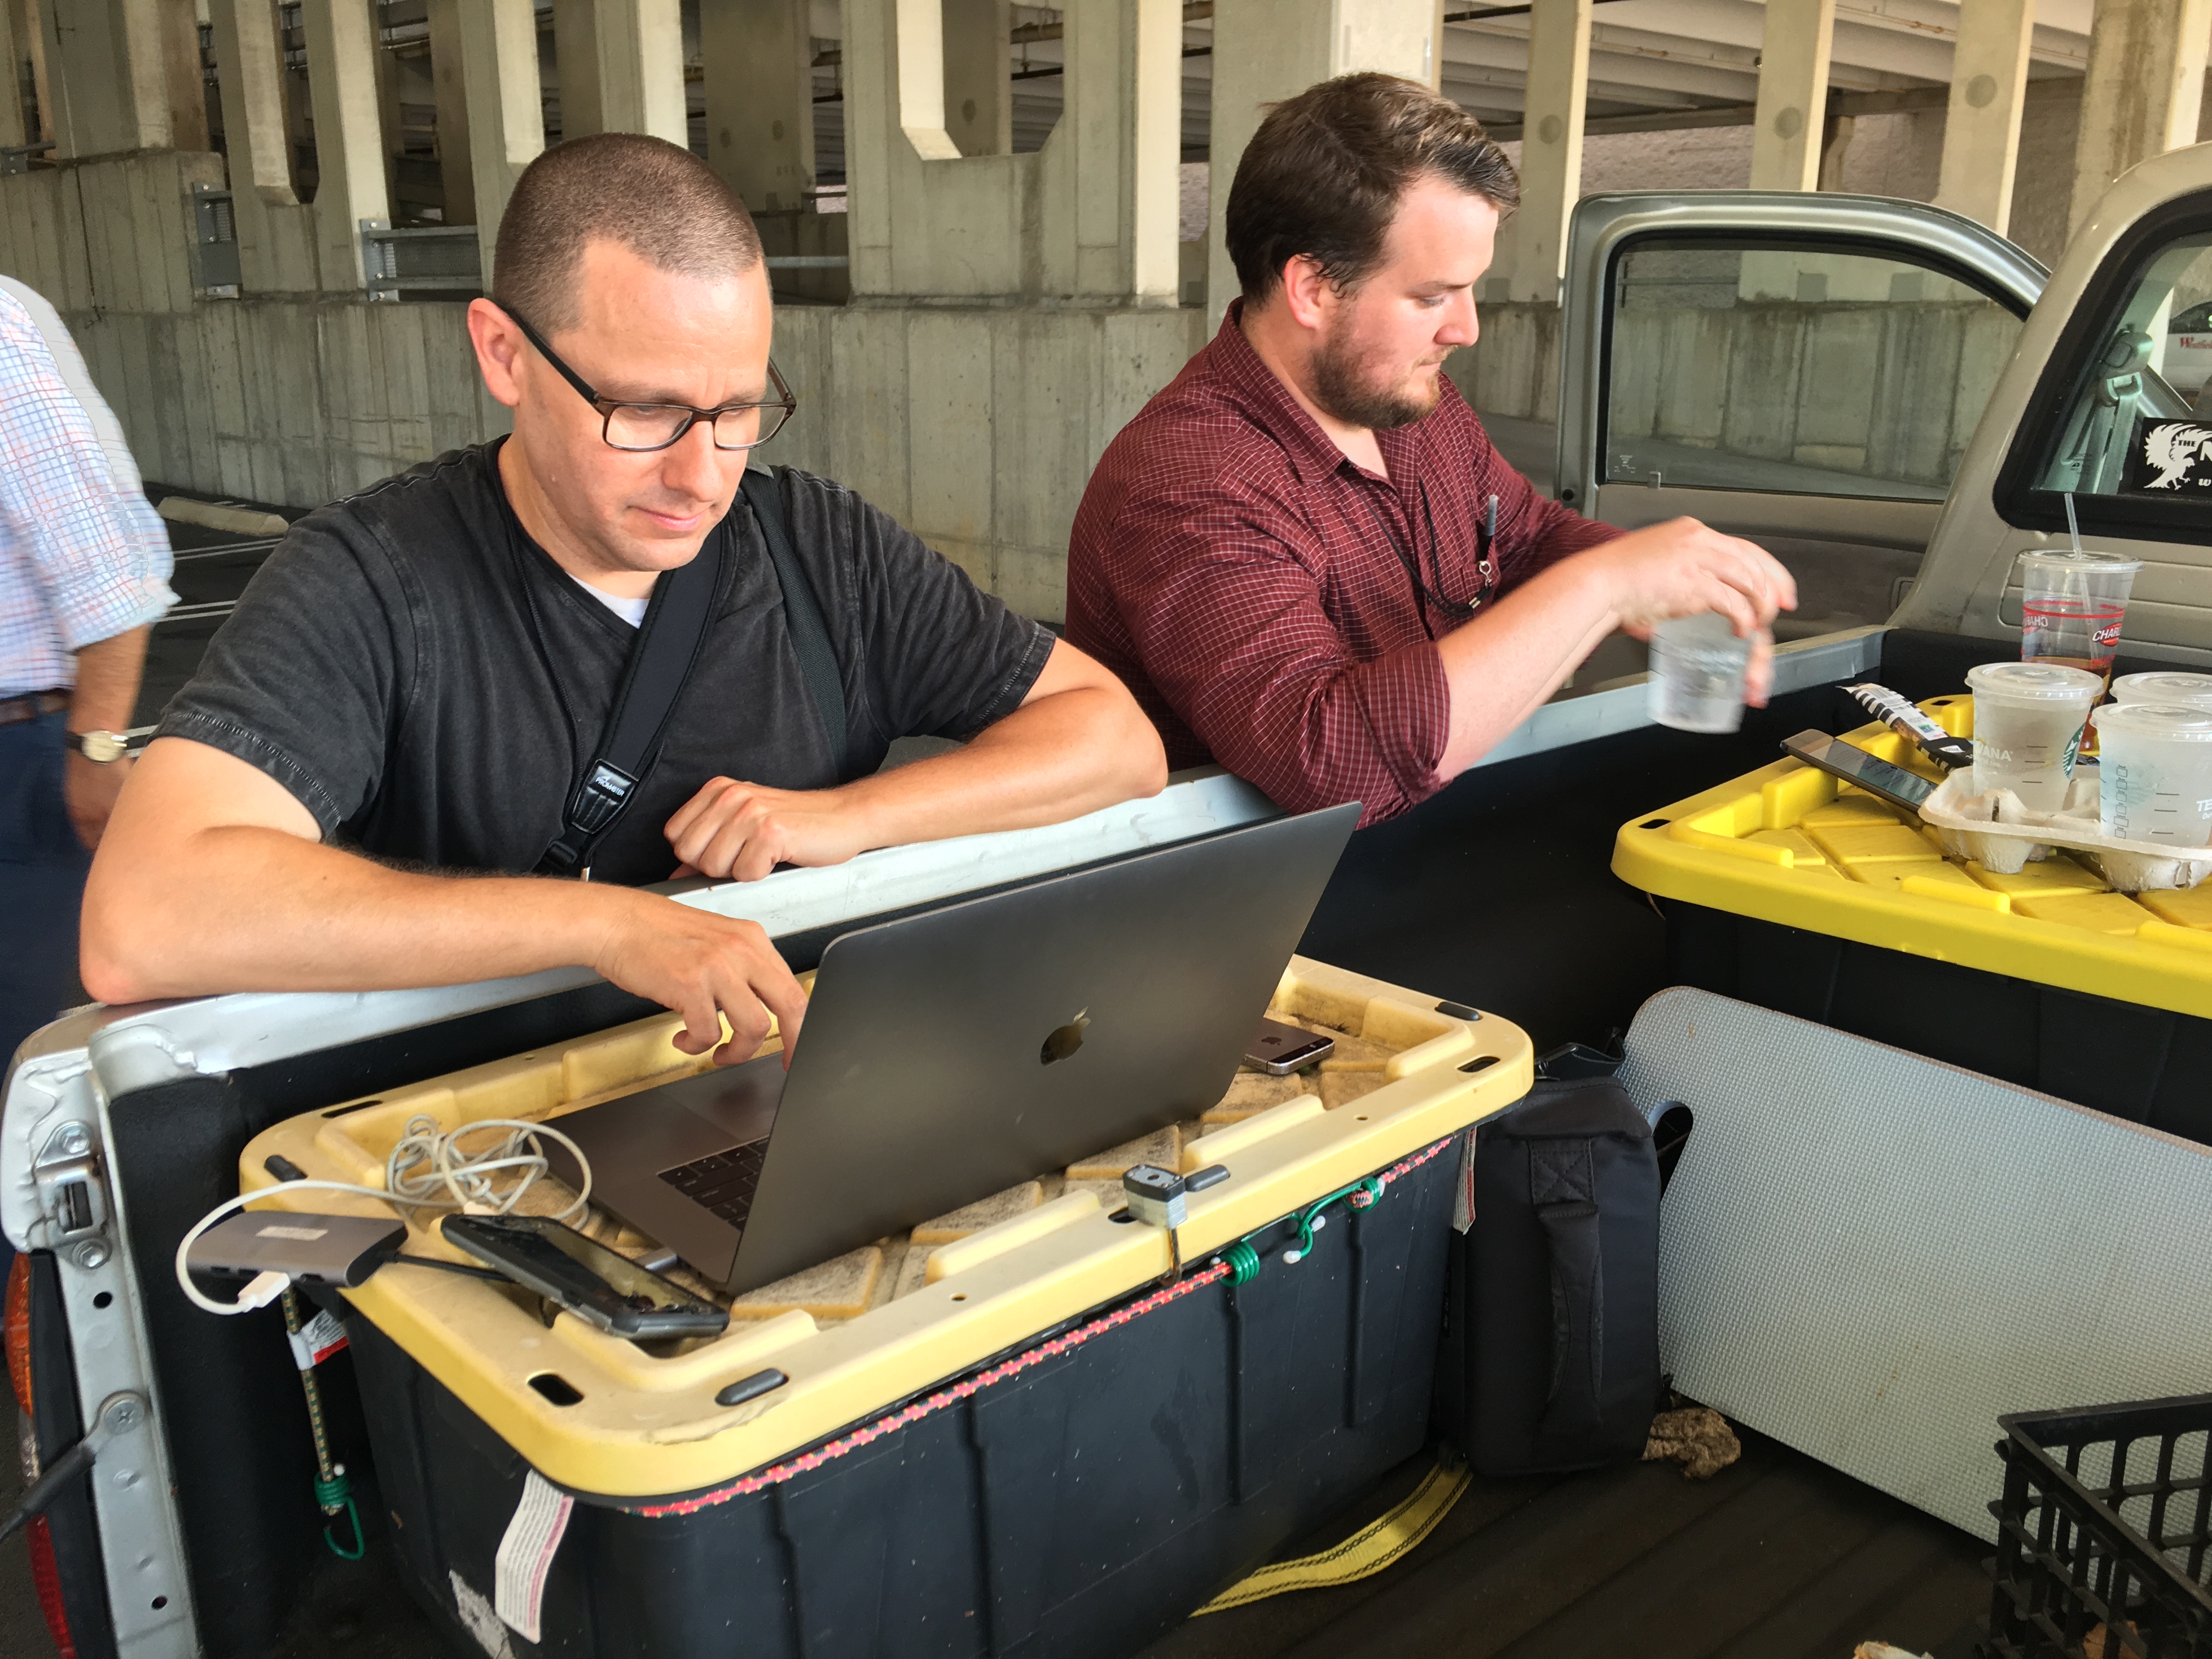 Capital Gazette reporter Chase Cook (R) and photographer Joshua McKerrow (L) work on the next days newspaper while awaiting news from their colleagues in Annapolis, Maryland, June 28, 2018. (Ivan Couronne—AFP/Getty Images)